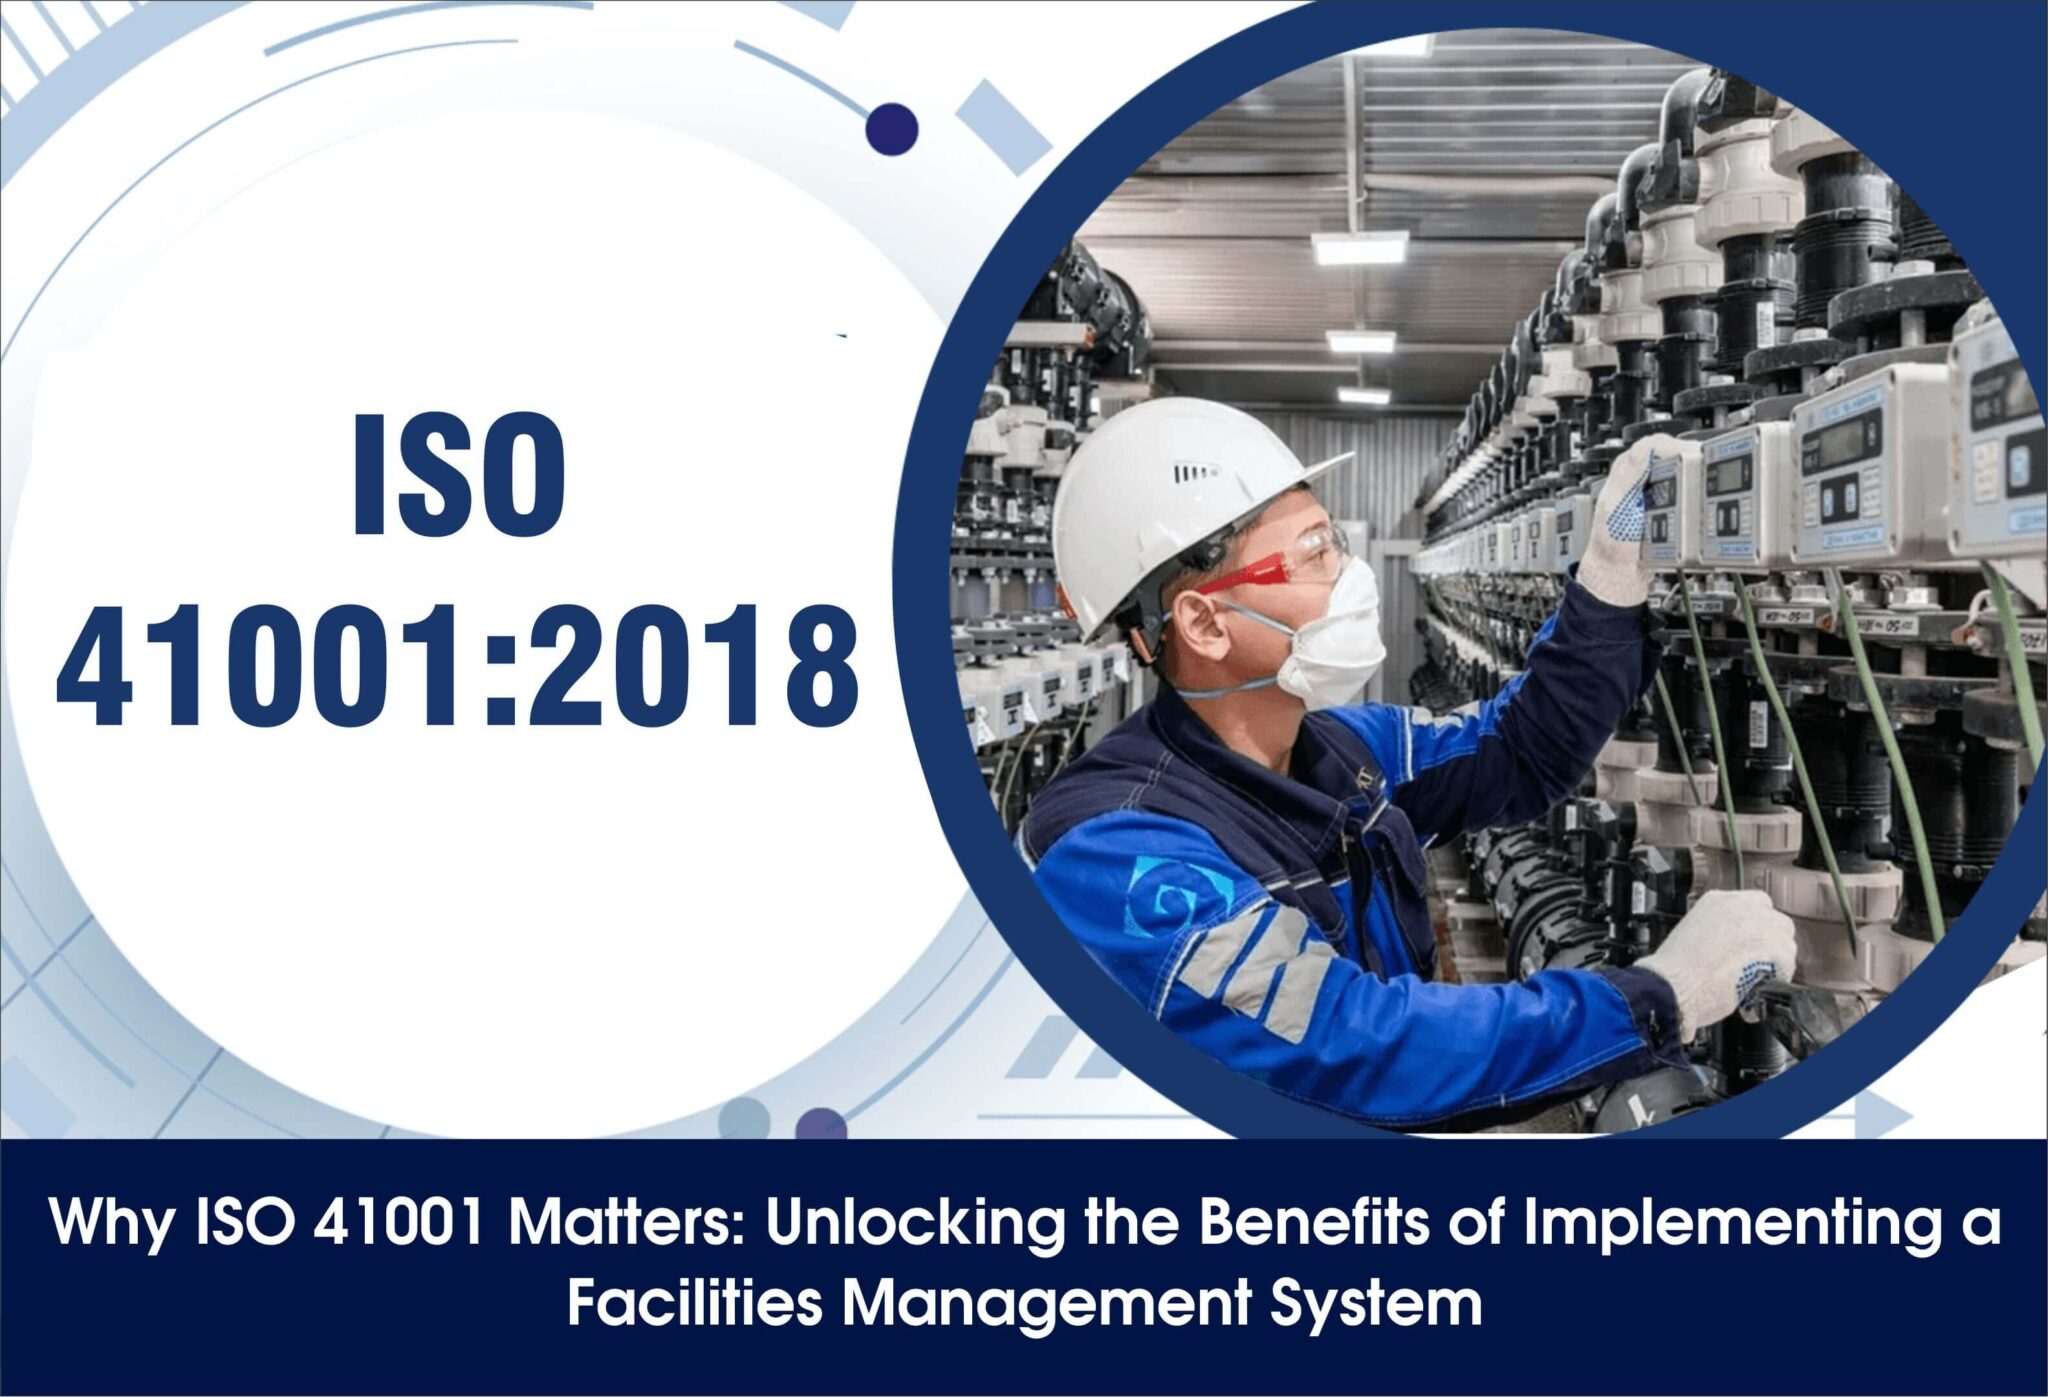 Why ISO 41001 Matters: Unlocking the Benefits of Implementing a Facilities Management System